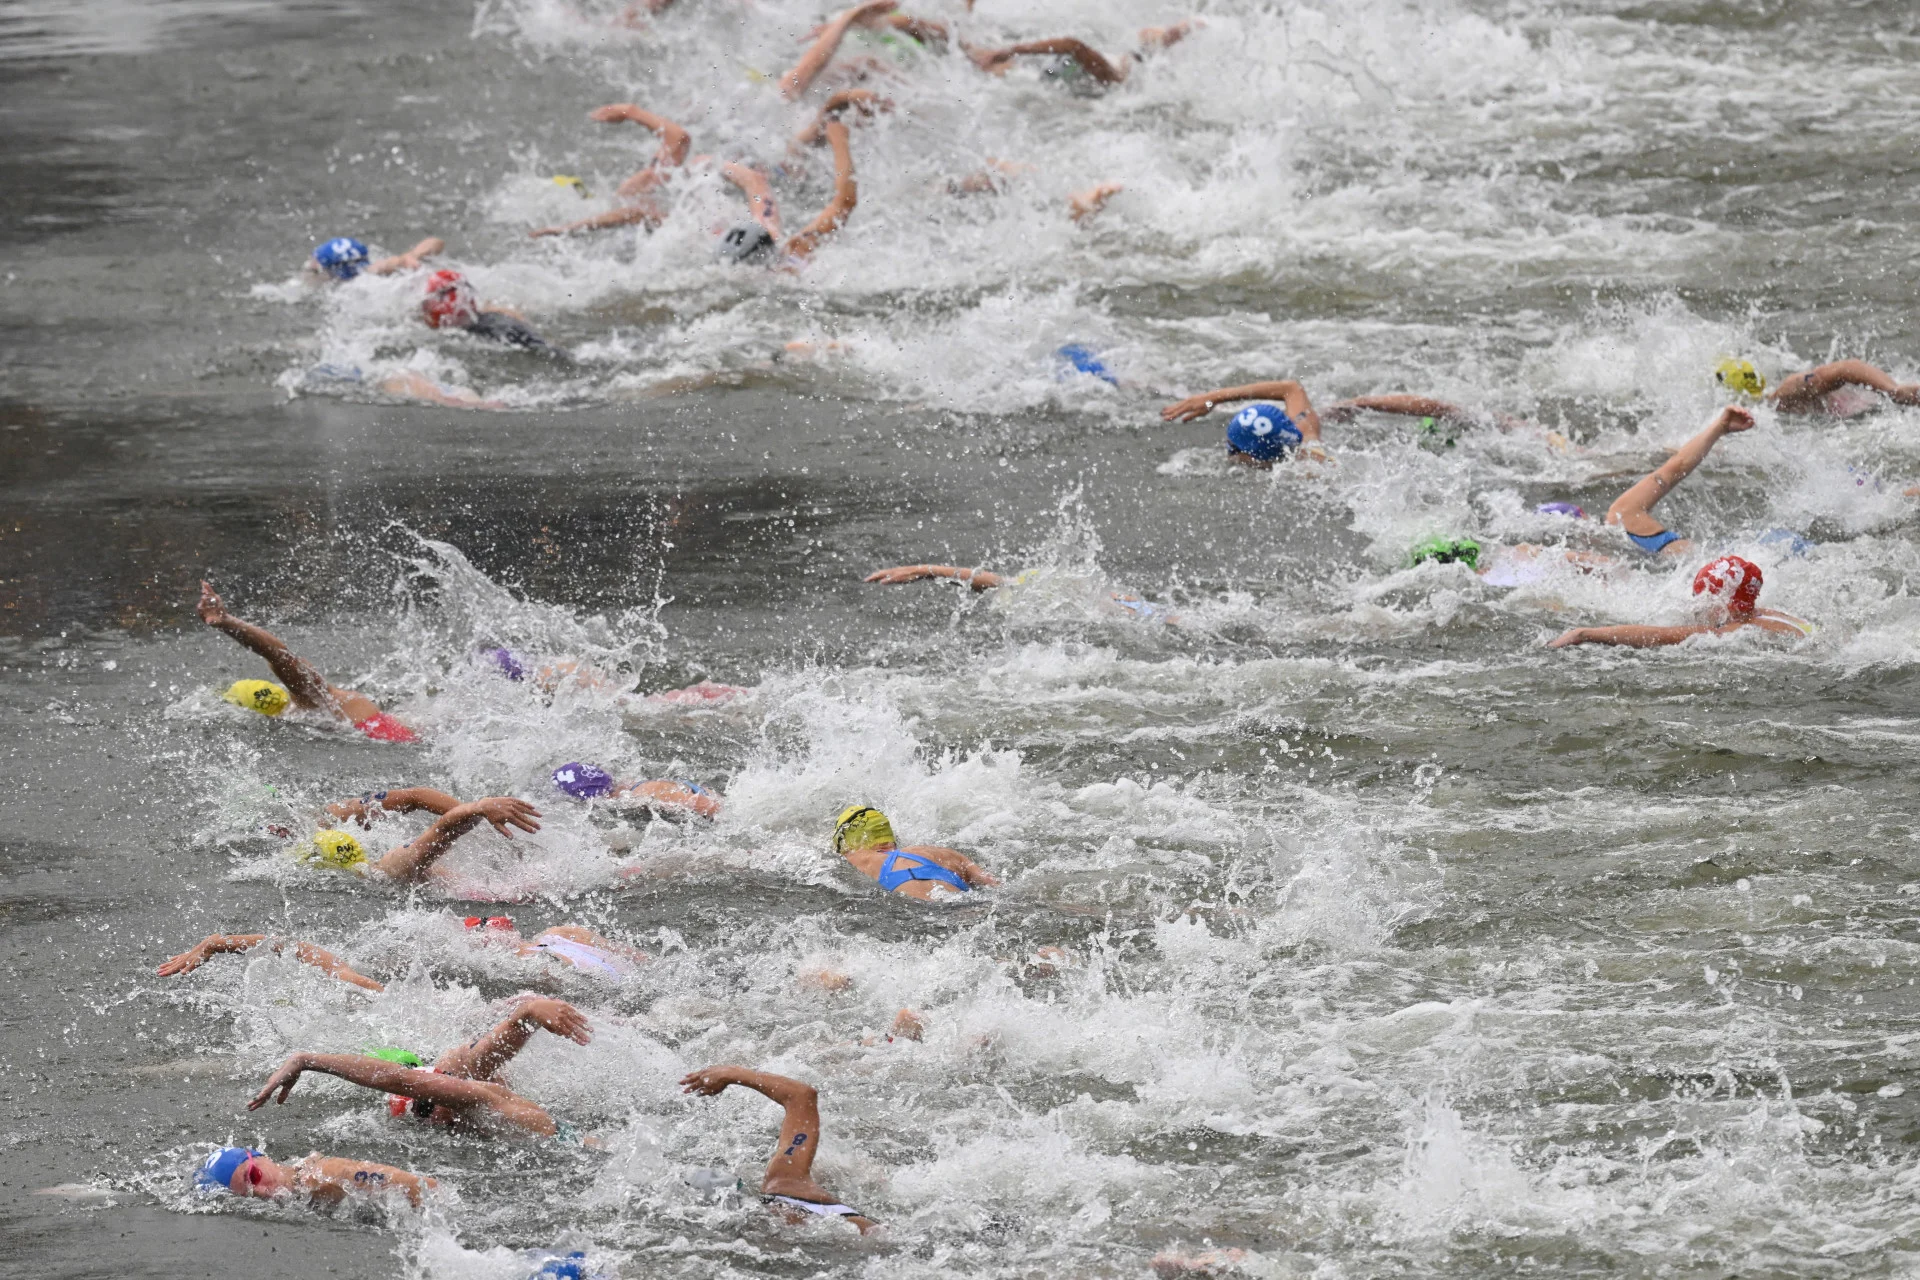 Paris 2024 Olympics: is open-water swimming in the Seine safe?